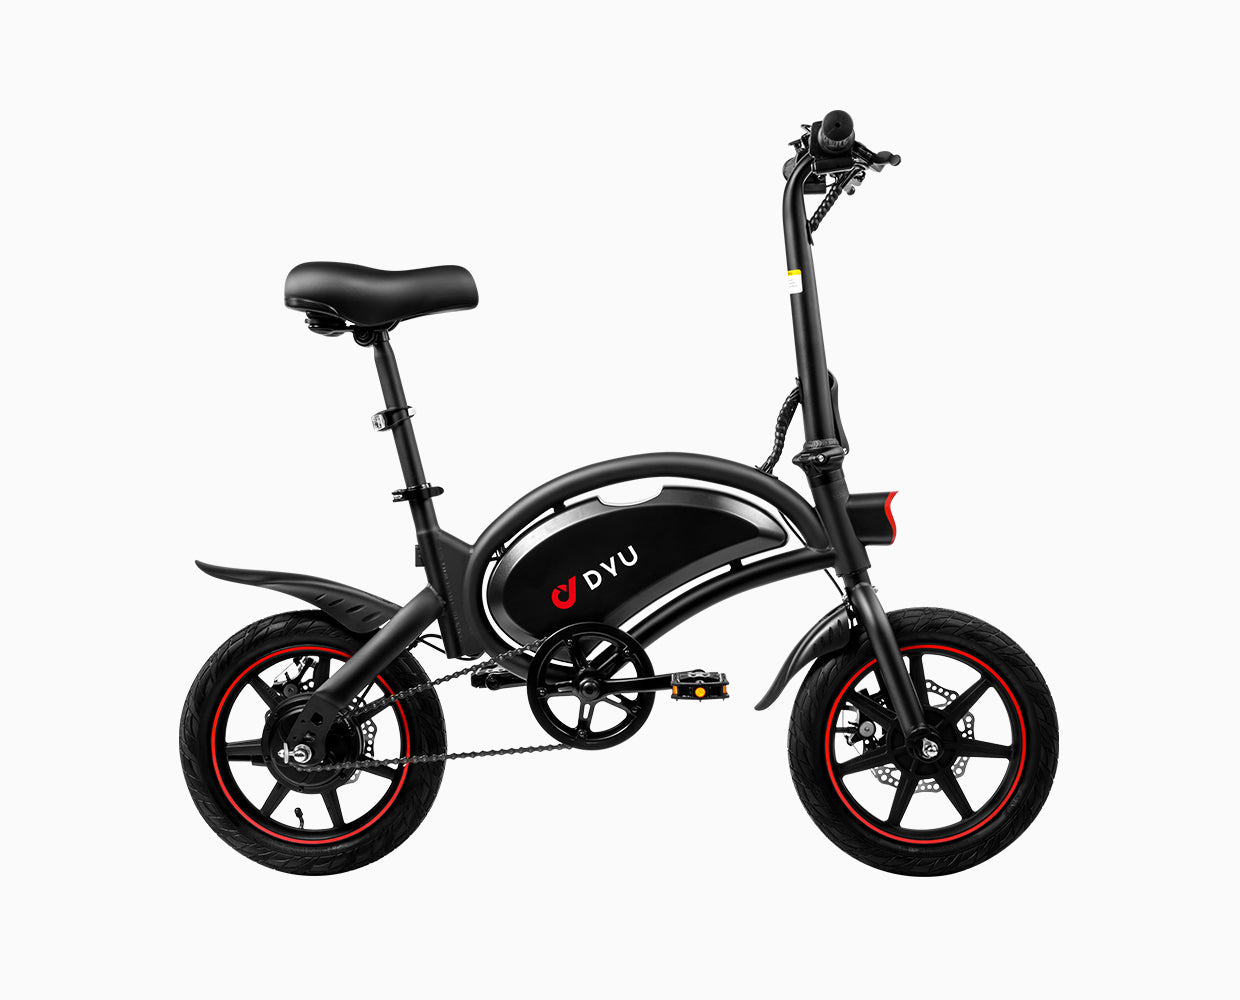 DYU eBike Autumn Sale Deals up to €300 off Compact and Folding